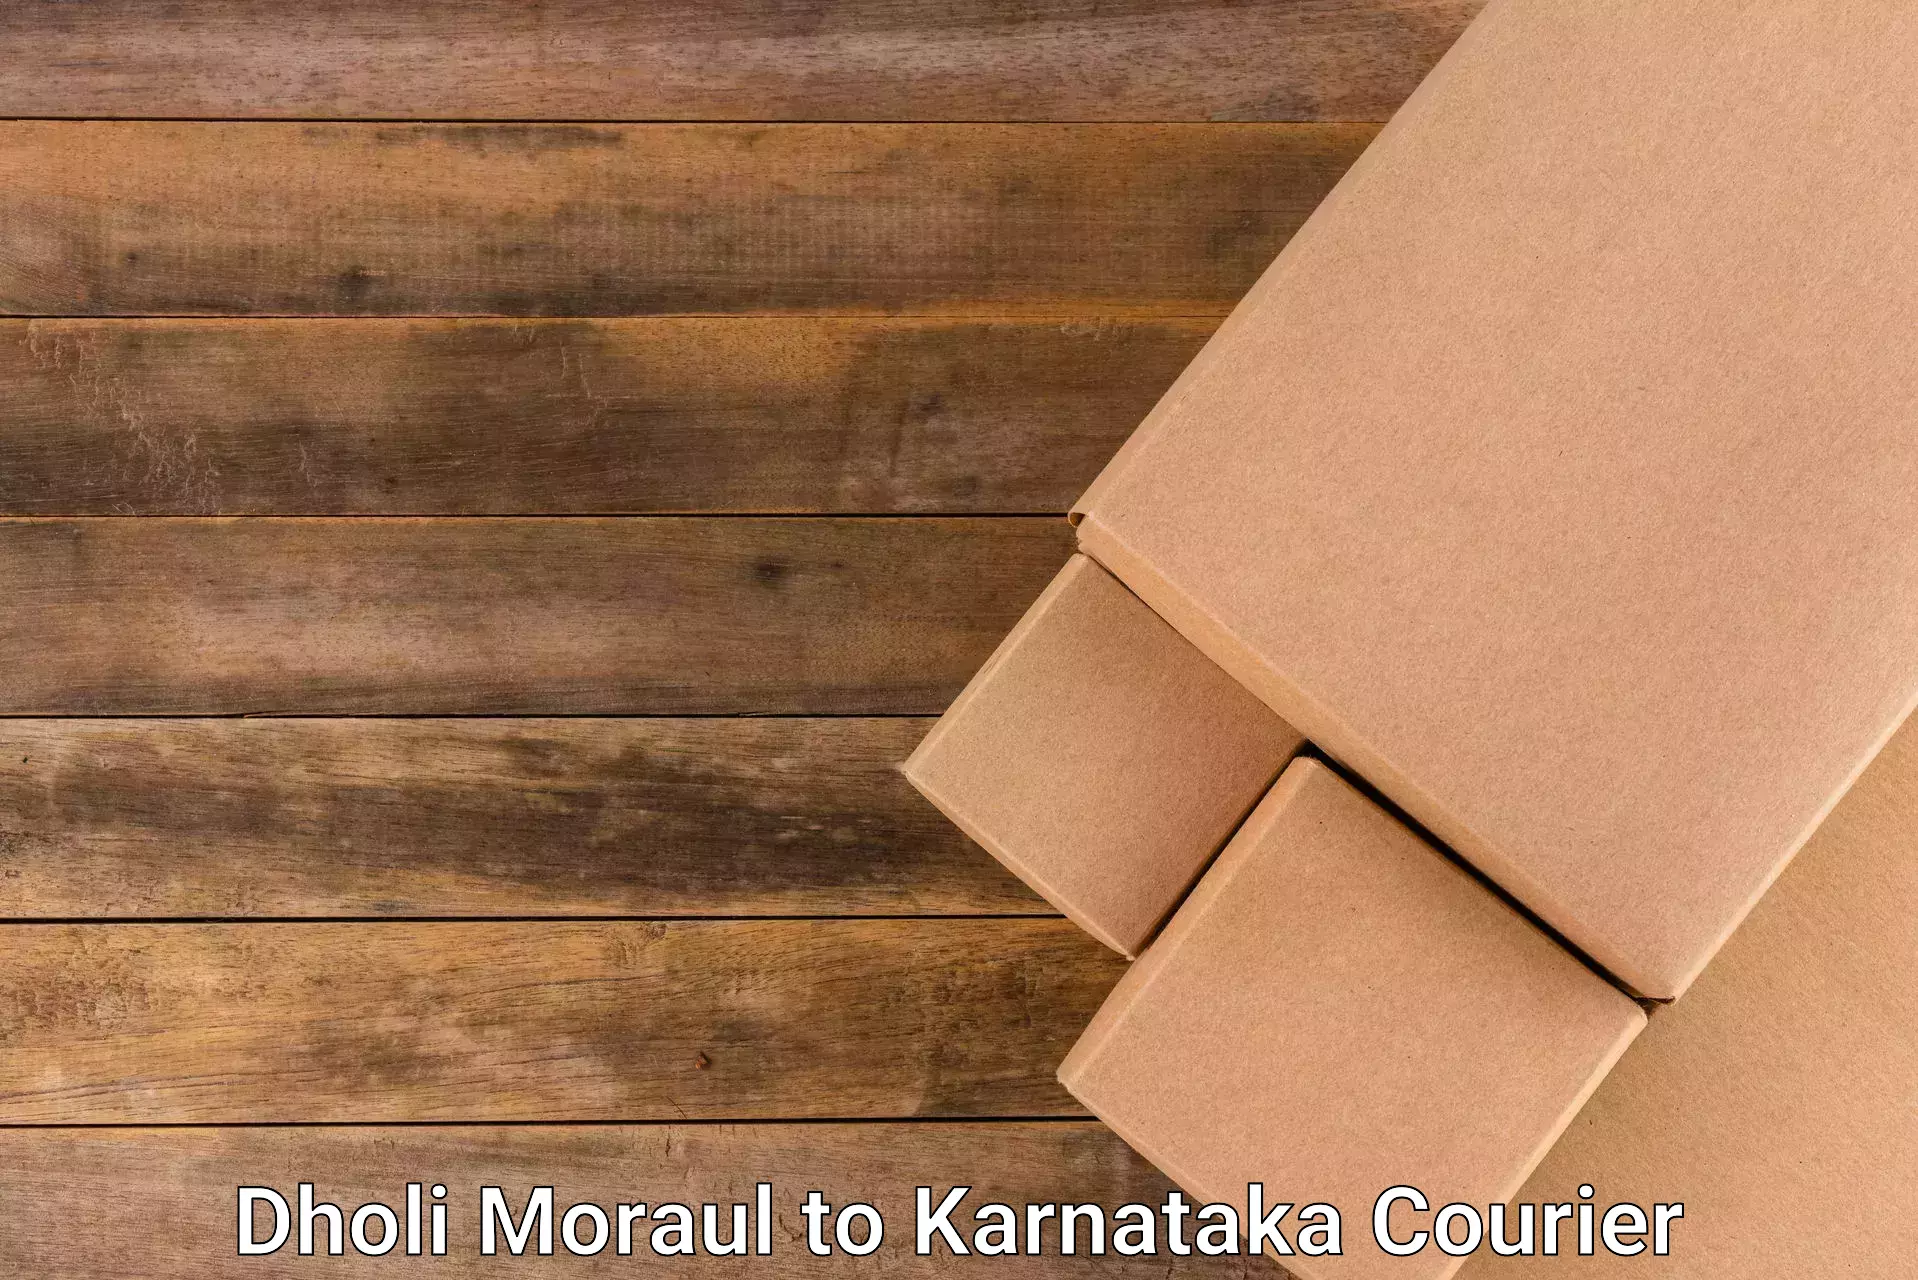 Professional courier handling Dholi Moraul to Shorapur